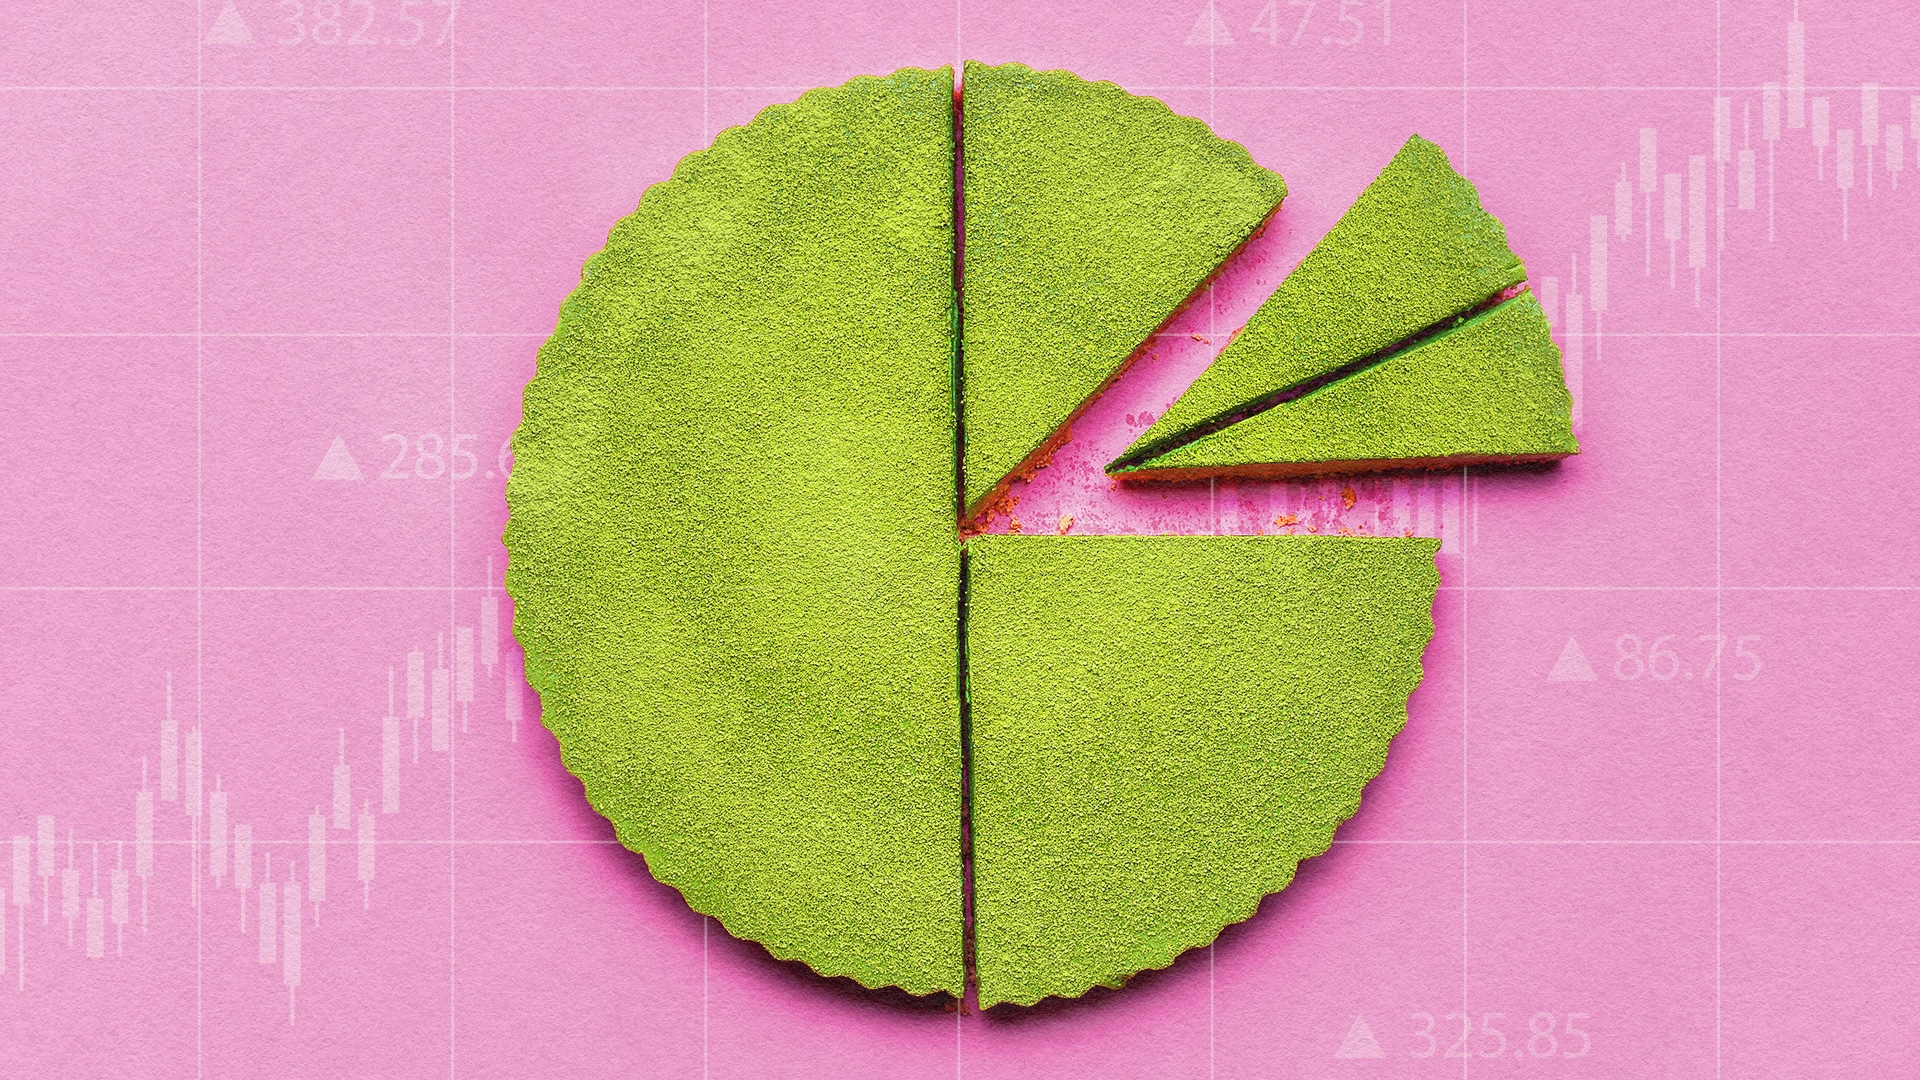 Illustration of a matcha cheesecake, sliced into smaller and smaller pieces. Stock market charts appear in the background.